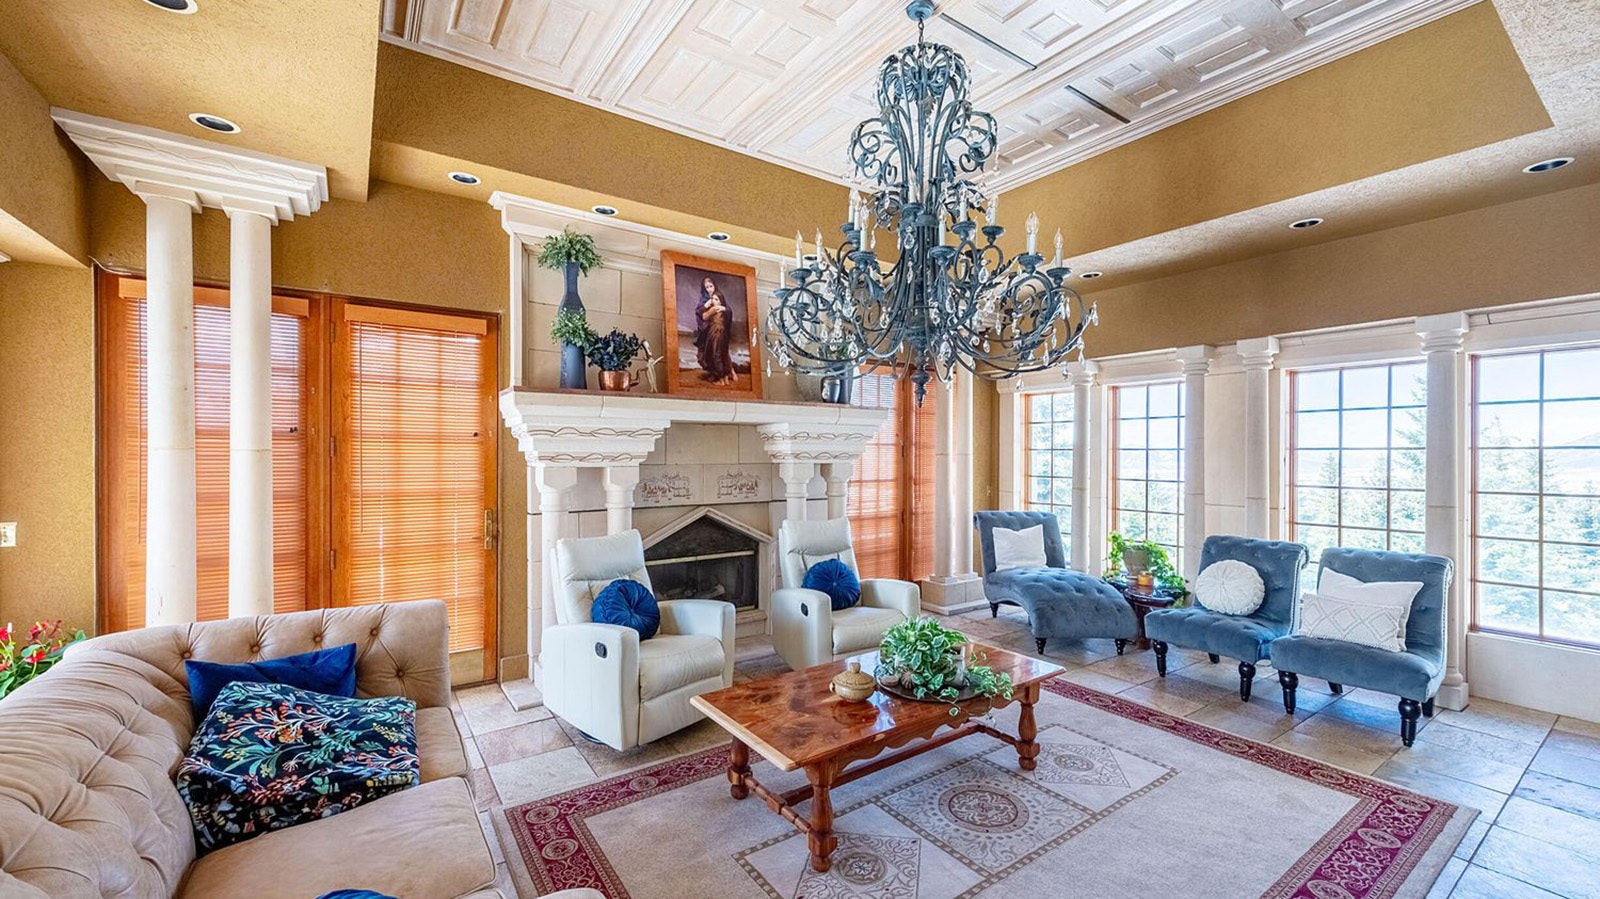 The living room features vaulted ceilings and lots of winders to let in natural light.